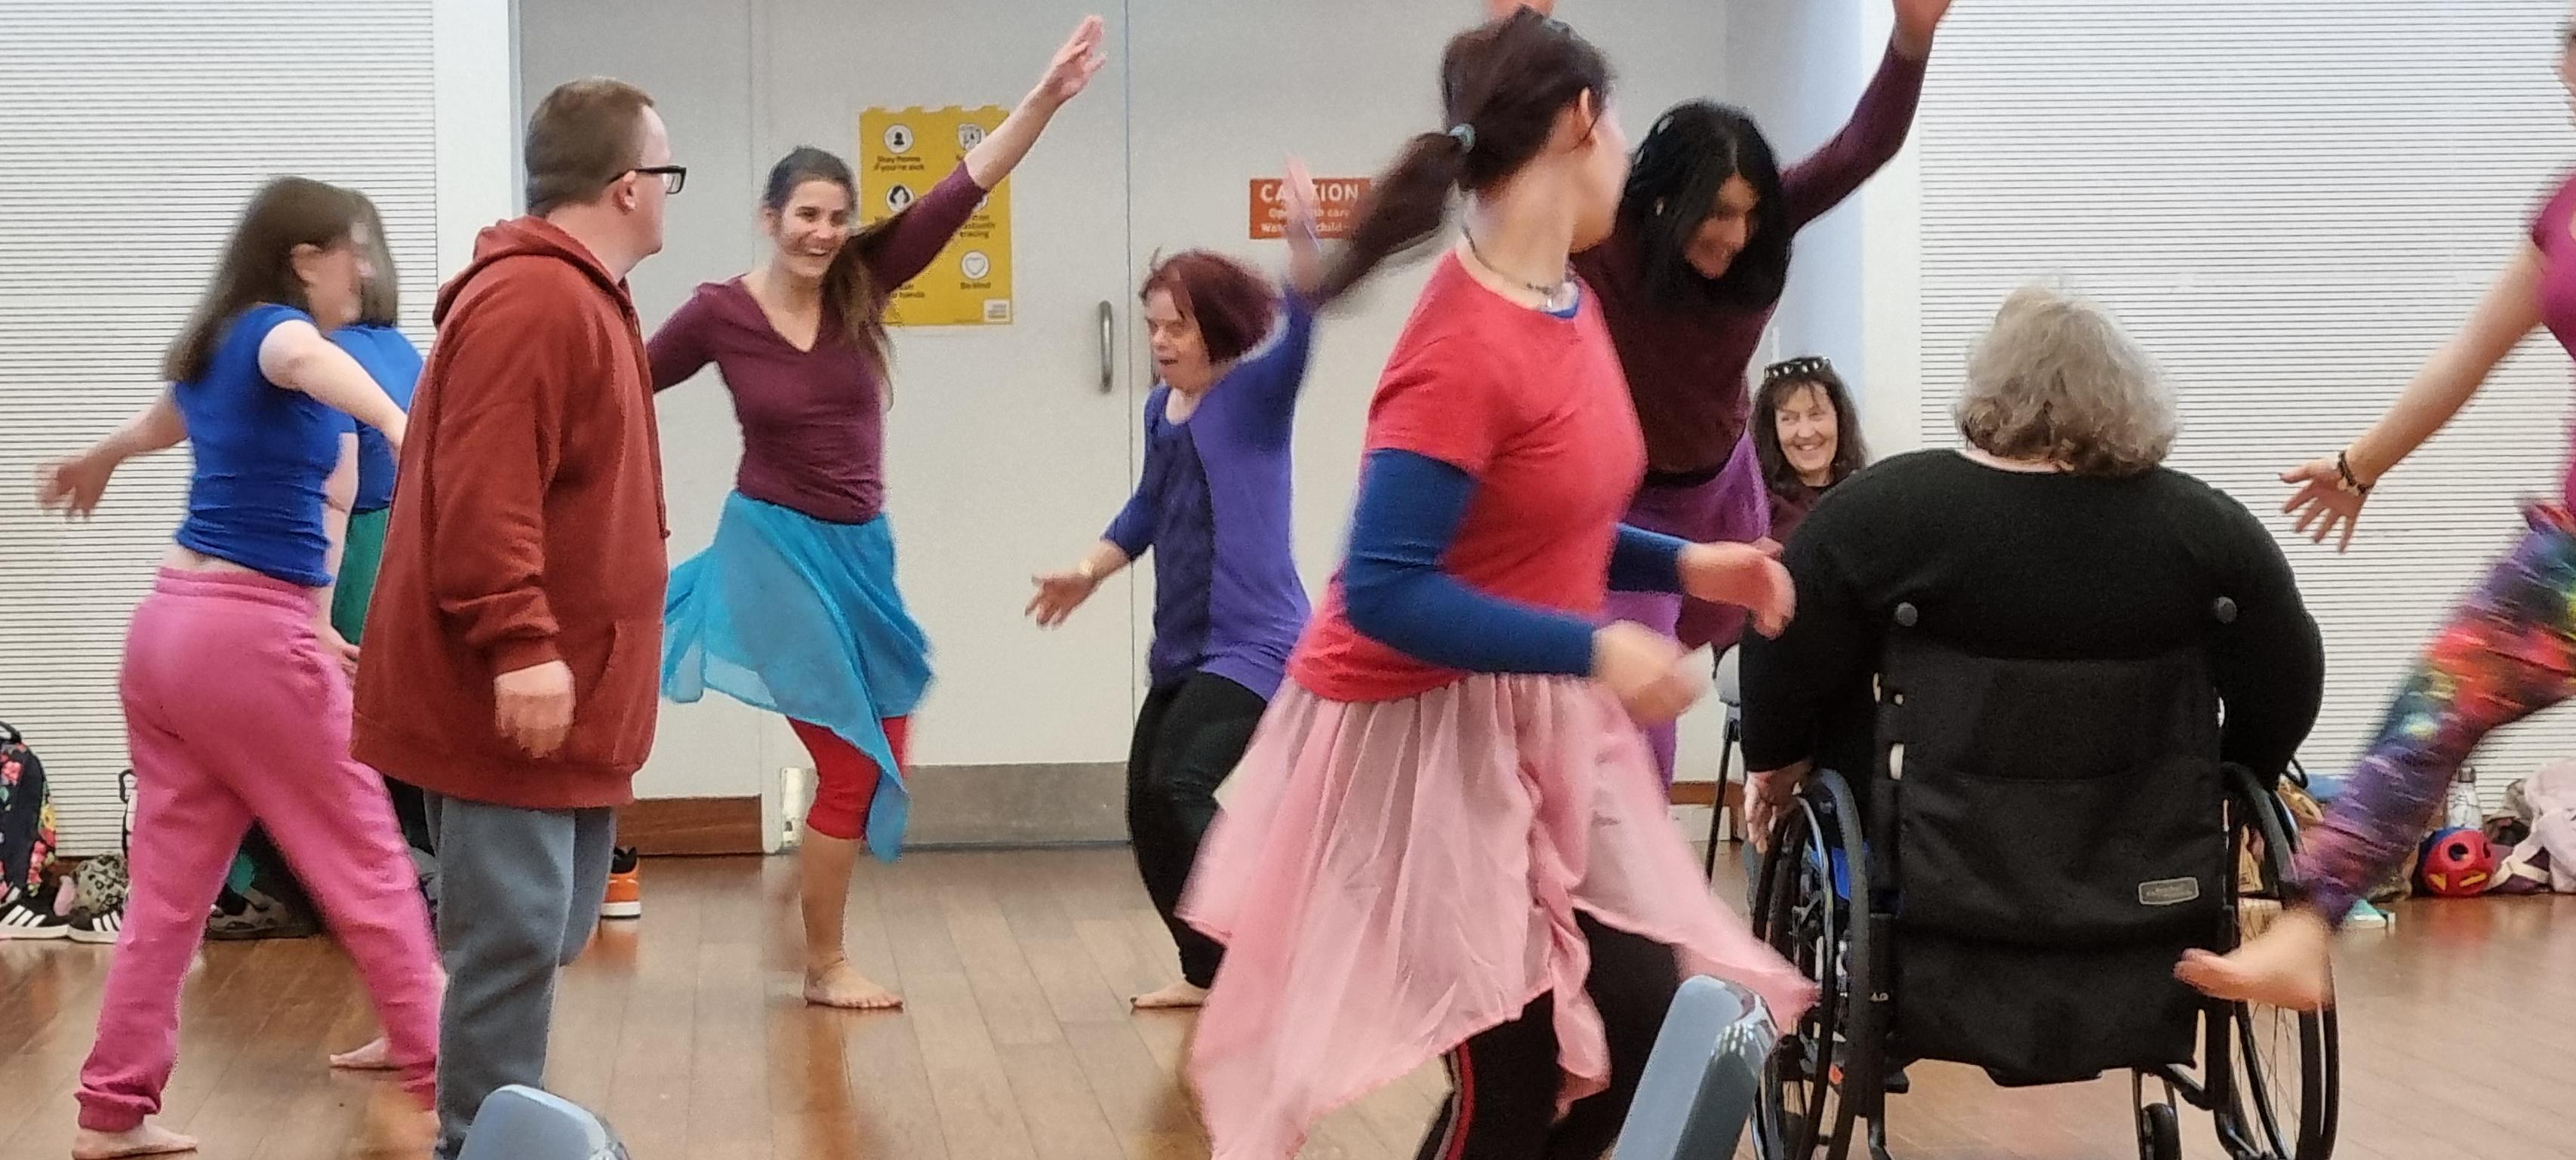 The Touch Compass Contemporary Class. Many people wearing block coloured clothing dancing at the same time, most of them standing, one person in a wheelchair. Some have their hands in the air. They are enjoying themselves.